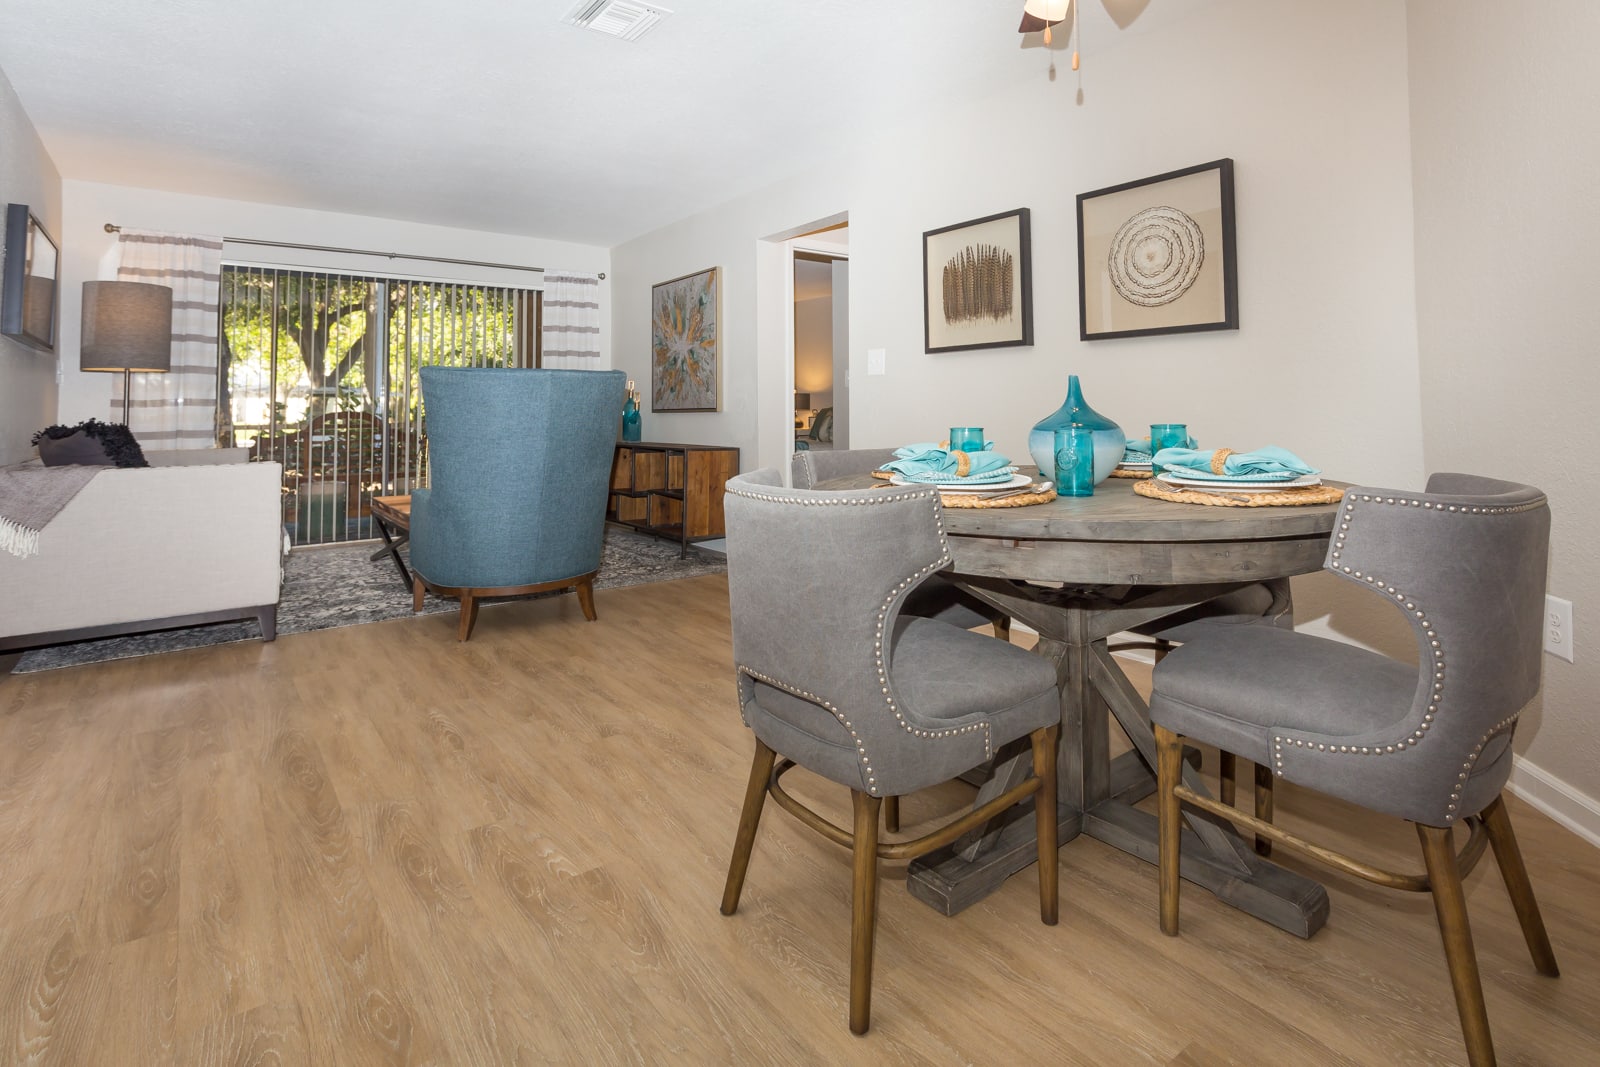 Spacious floor plans with dining areas.